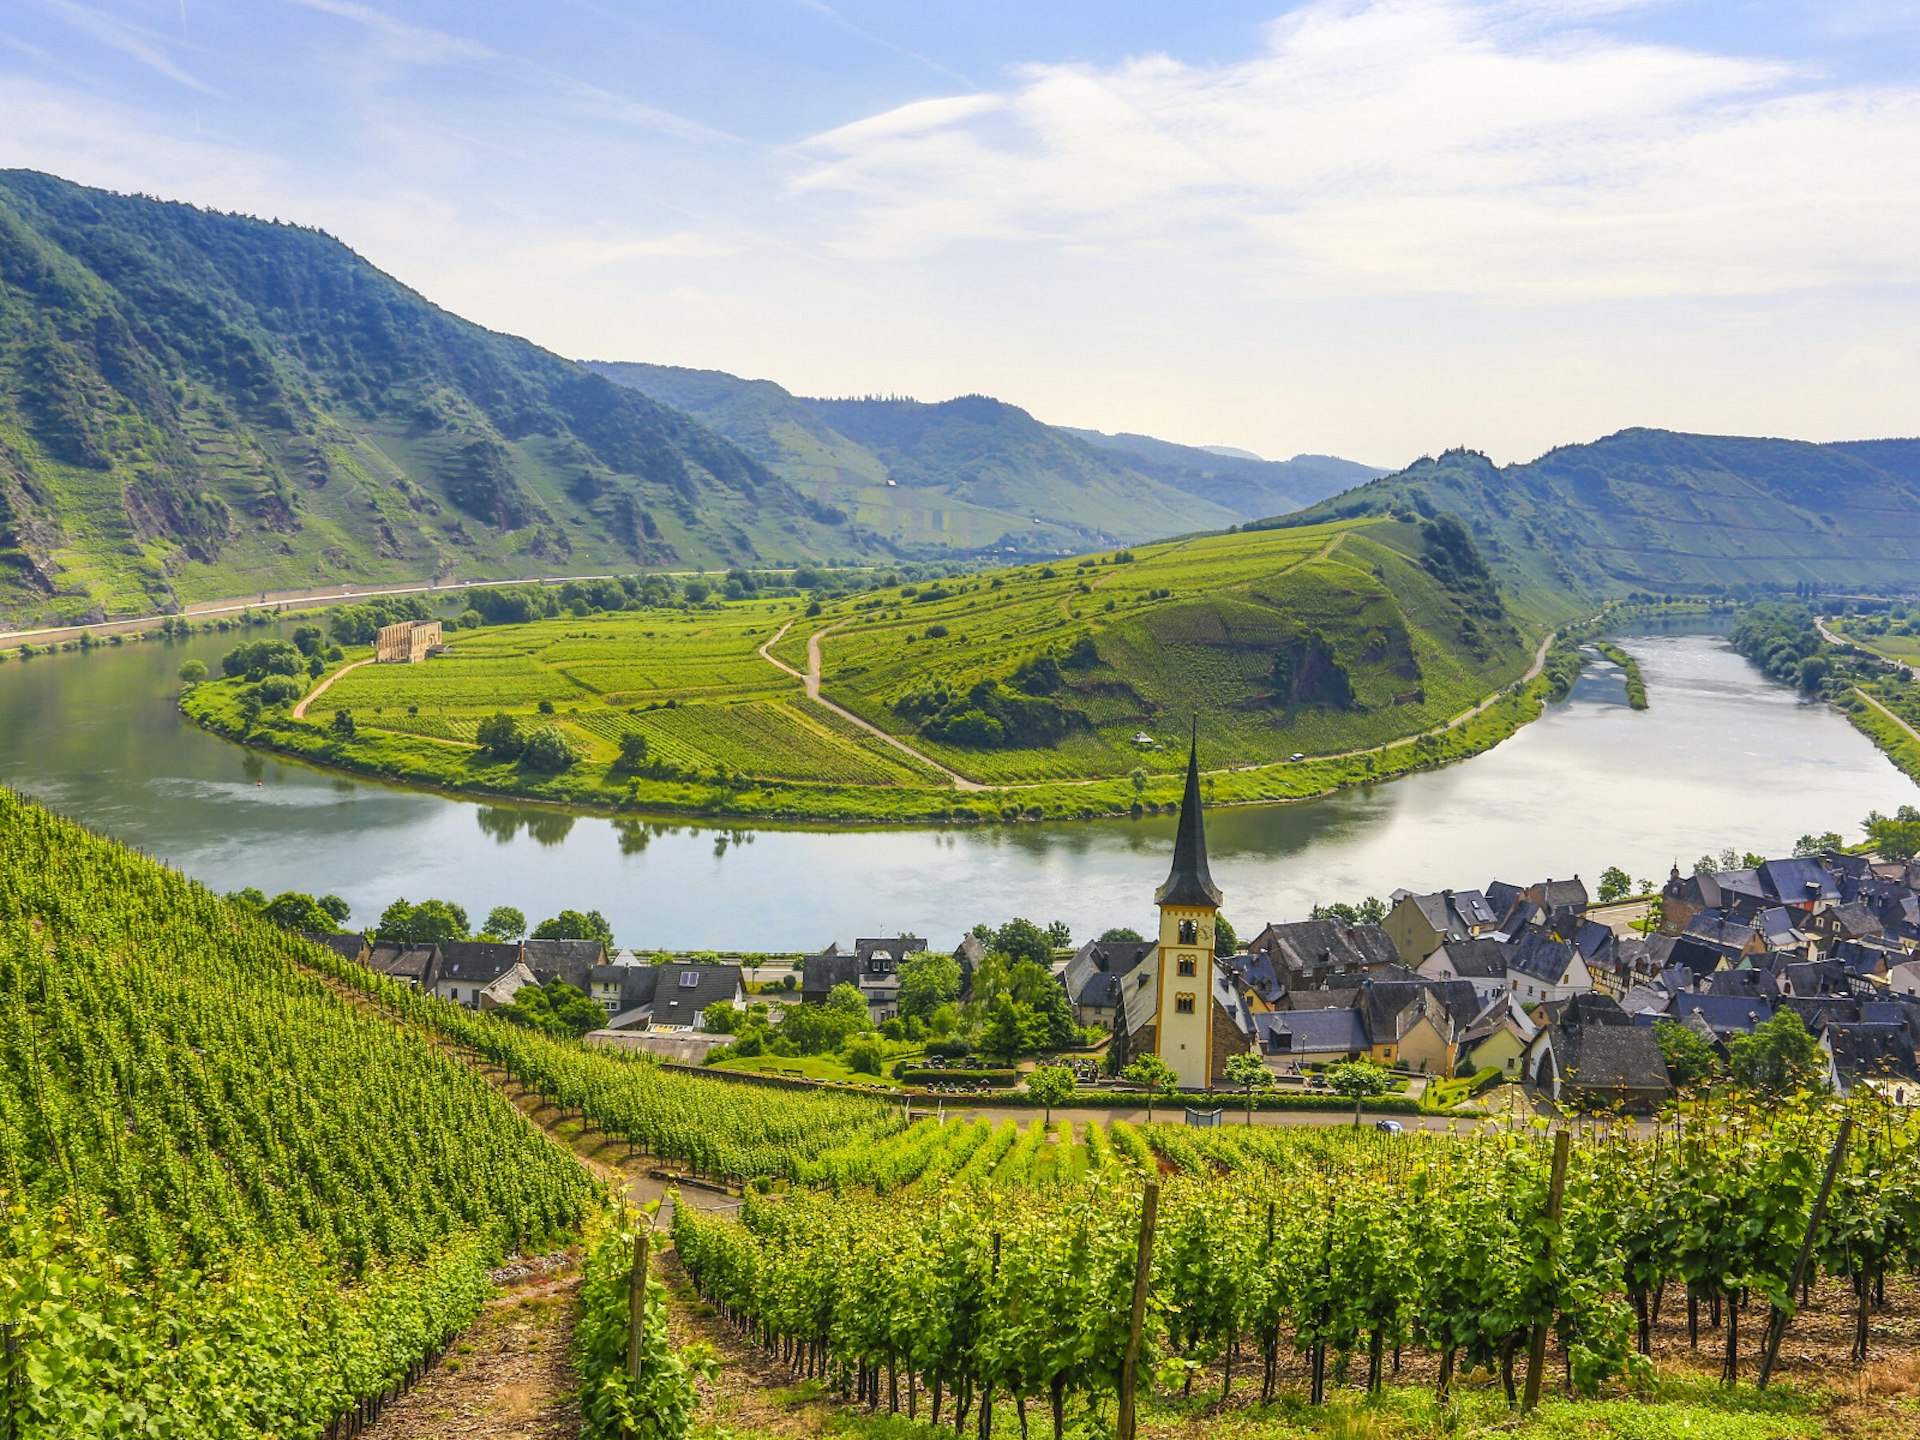 Lush green vineyards surround a bend in the river; a village with a church sits at the edge of the river